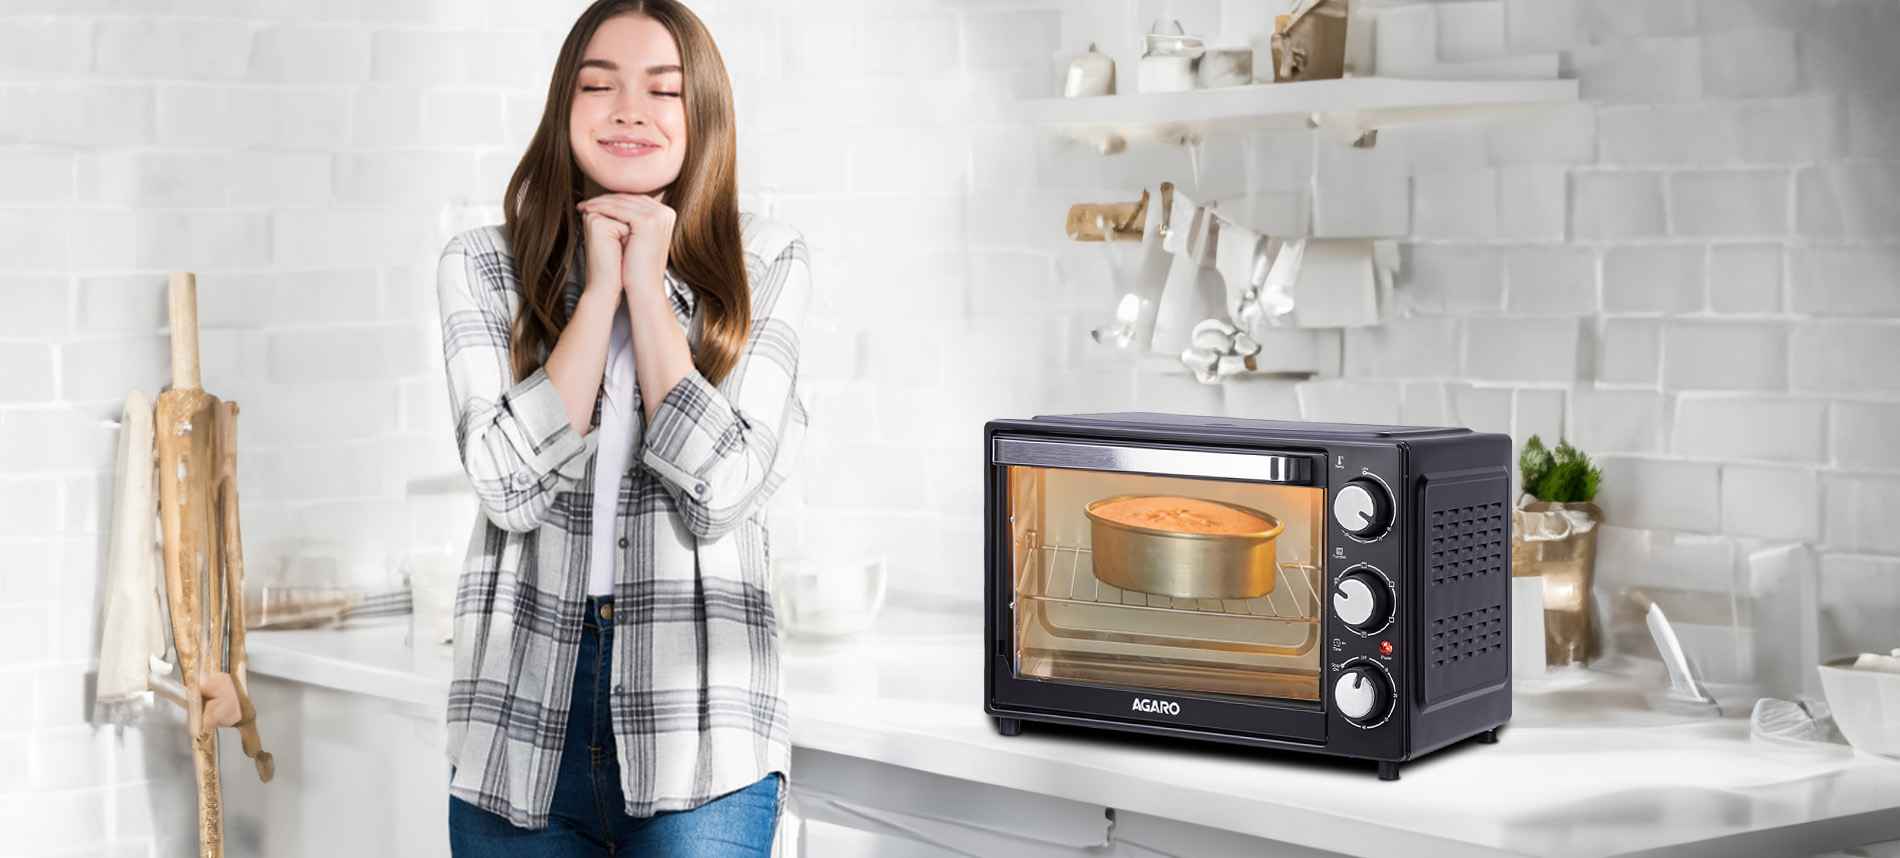 https://agarolifestyle.com/cdn/shop/articles/The_Benefits_of_OTG_with_Convection_Faster_Healthier_and_Tastier_Cooking.jpg?v=1692979267